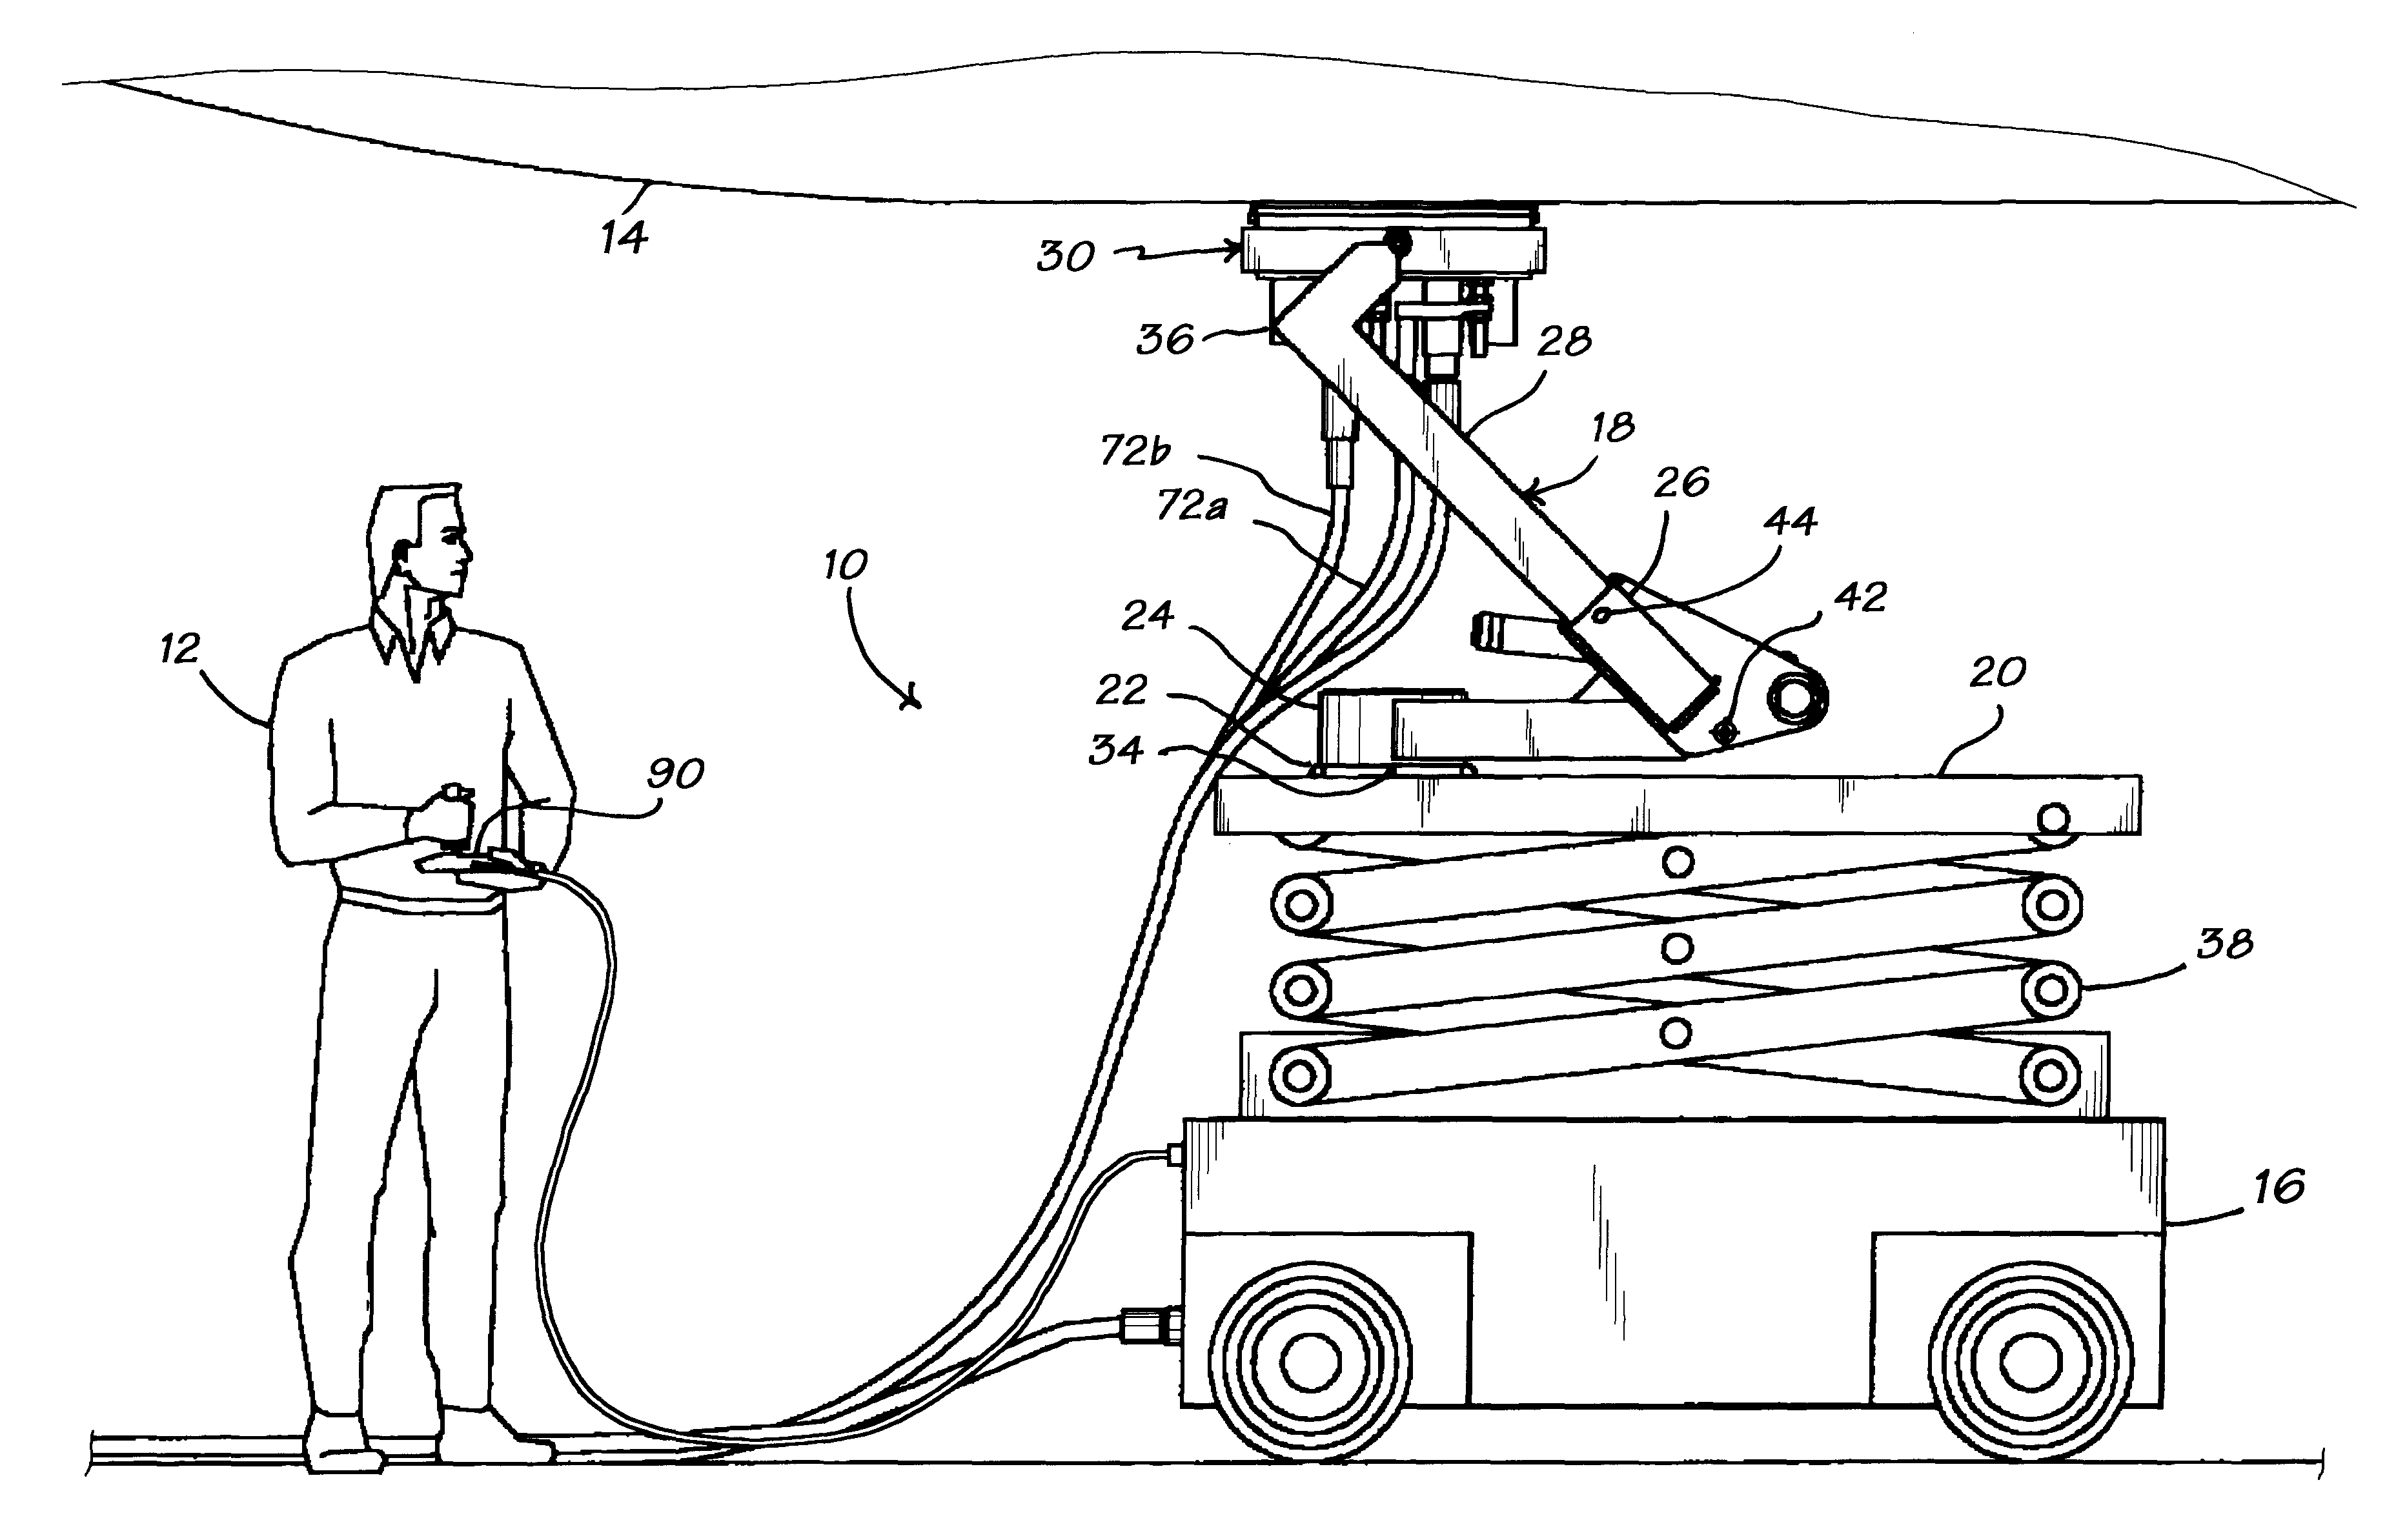 Contour-following apparatus for cleaning surfaces